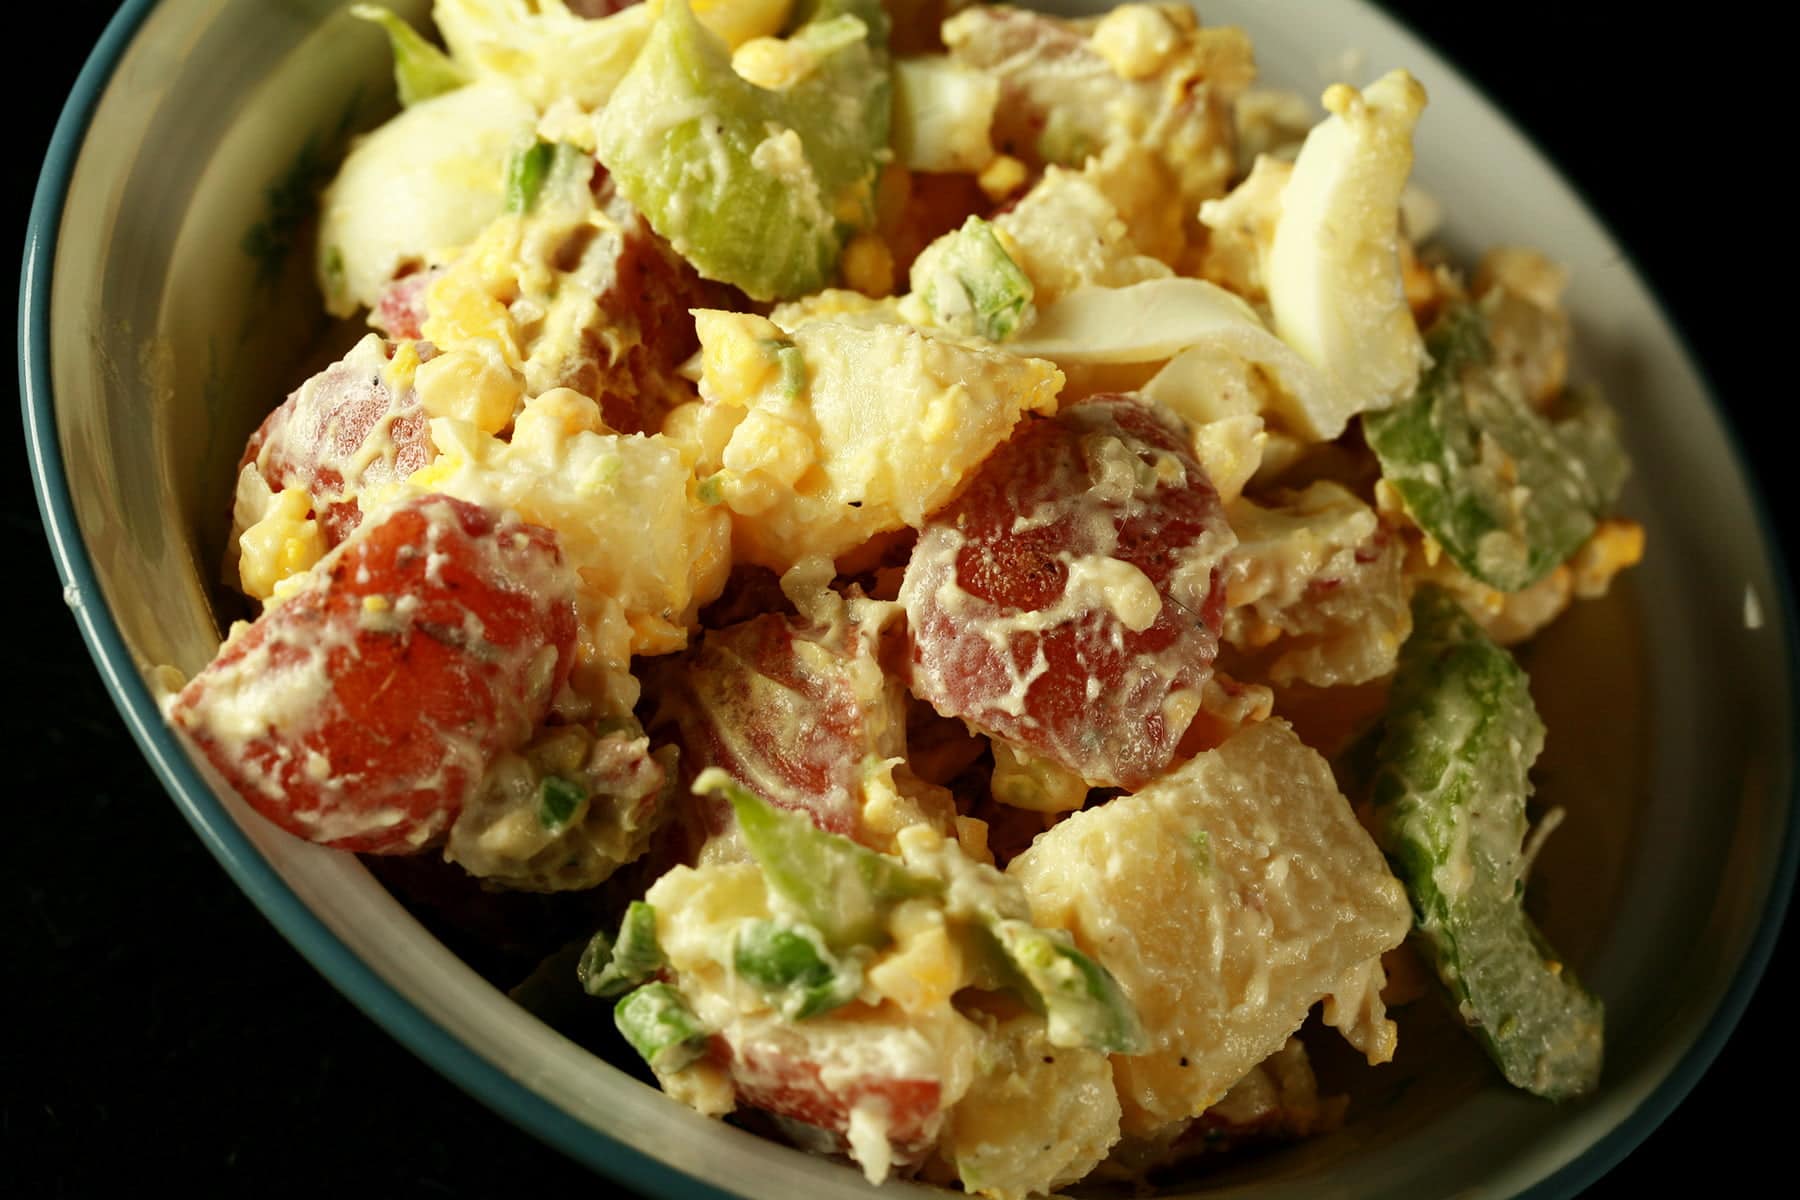 A bowl of a creamy smoked potato salad. Chunks of red potatoes, celery slices, and hard boiled egg are all visible.